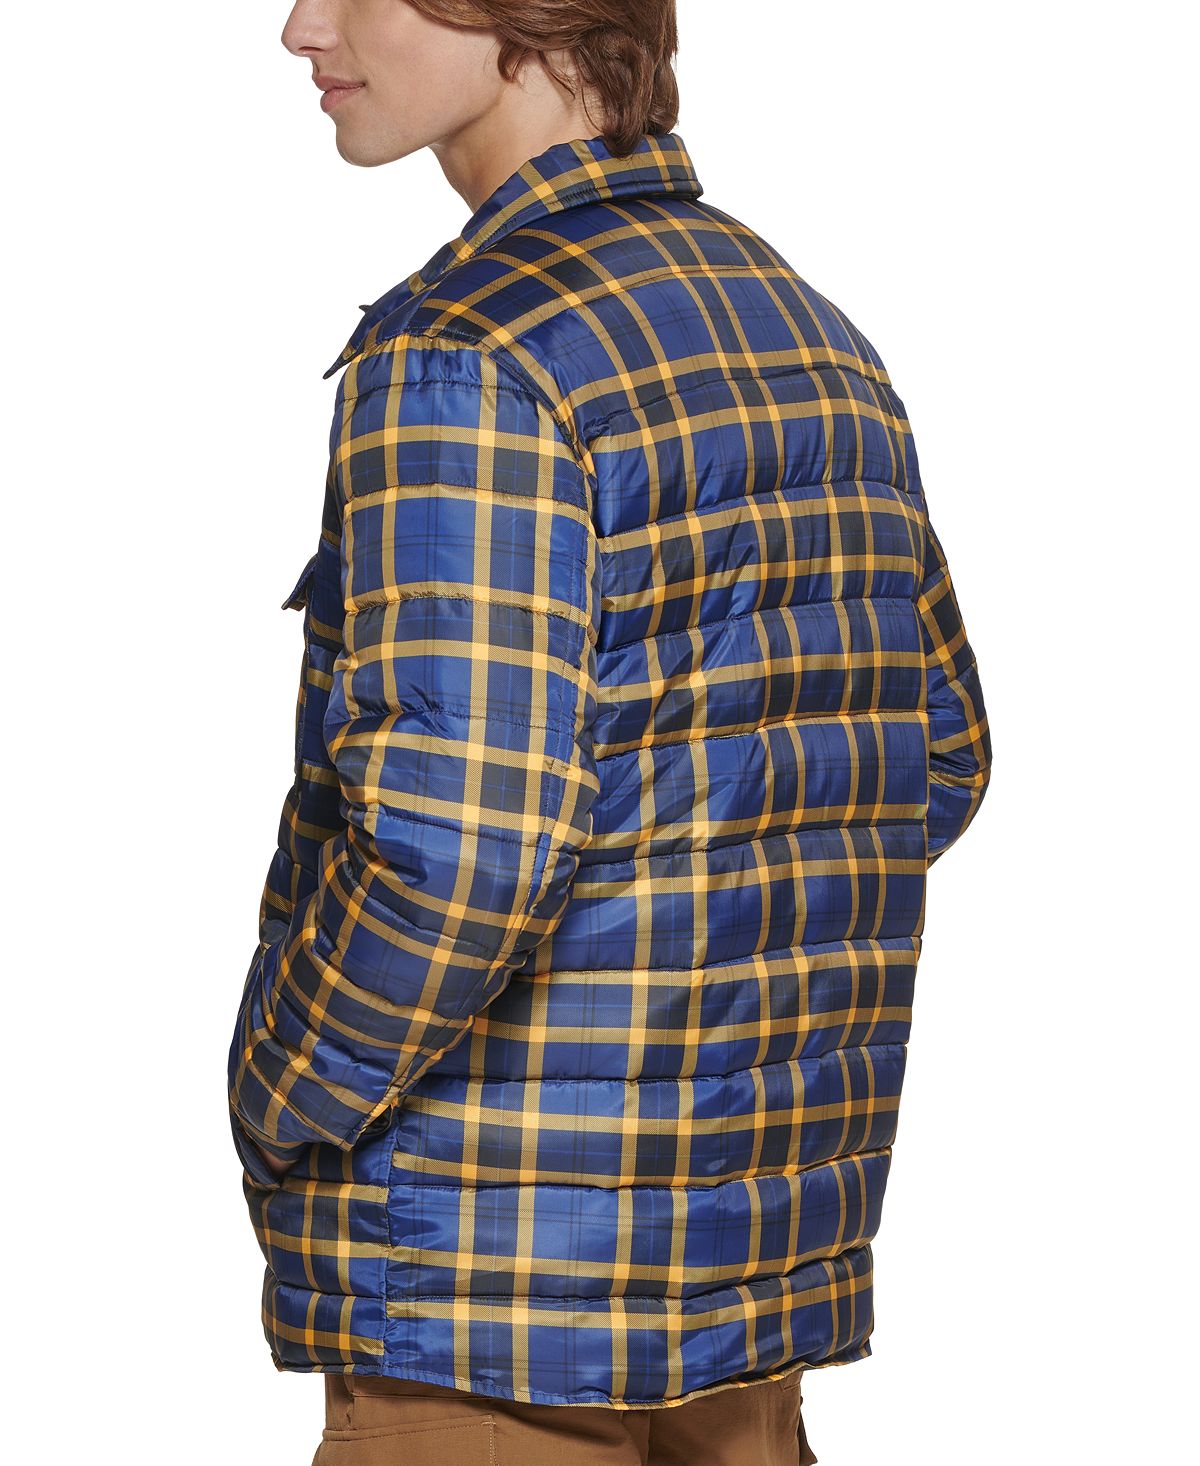 Bass Outdoor Mission Plaid Puffer Jacket Navy/yellow